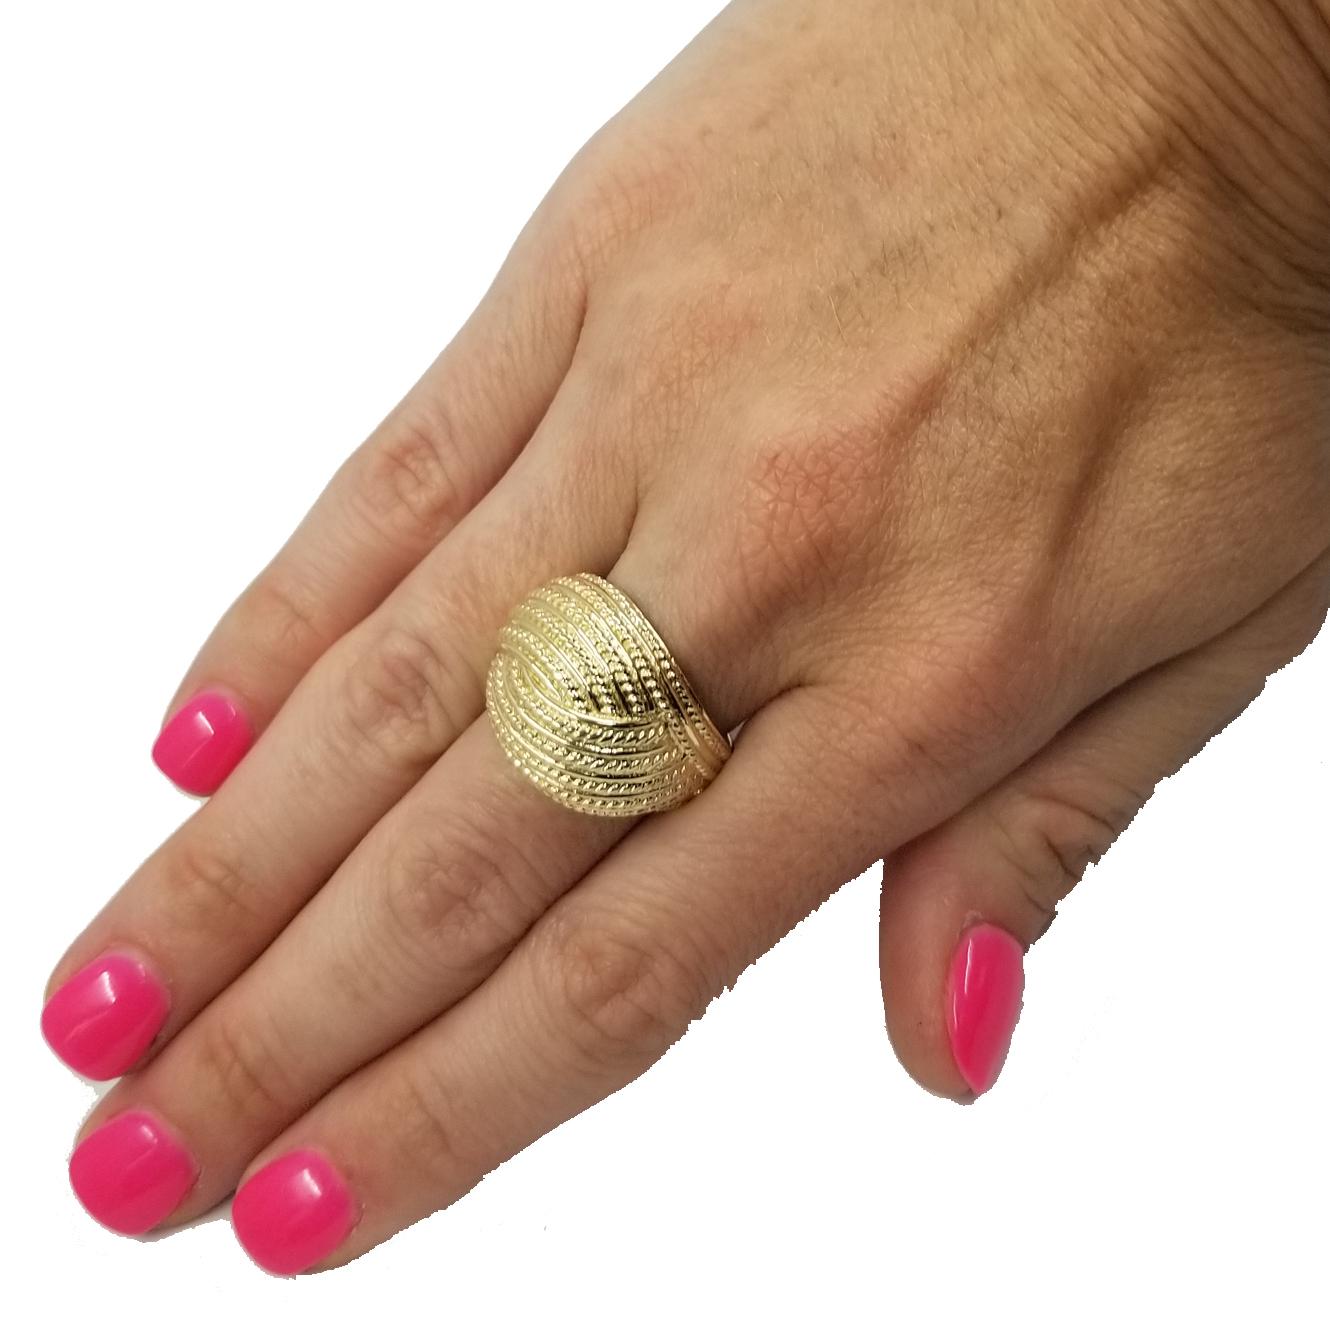 14 Karat Yellow Gold Textured Rope Dome Ring. Finished Weight is 9.6 Grams. Current Finger Size 8; Your Purchase Includes One Free Sizing. Professionally Cleaned & Polished to Remove Scratches.